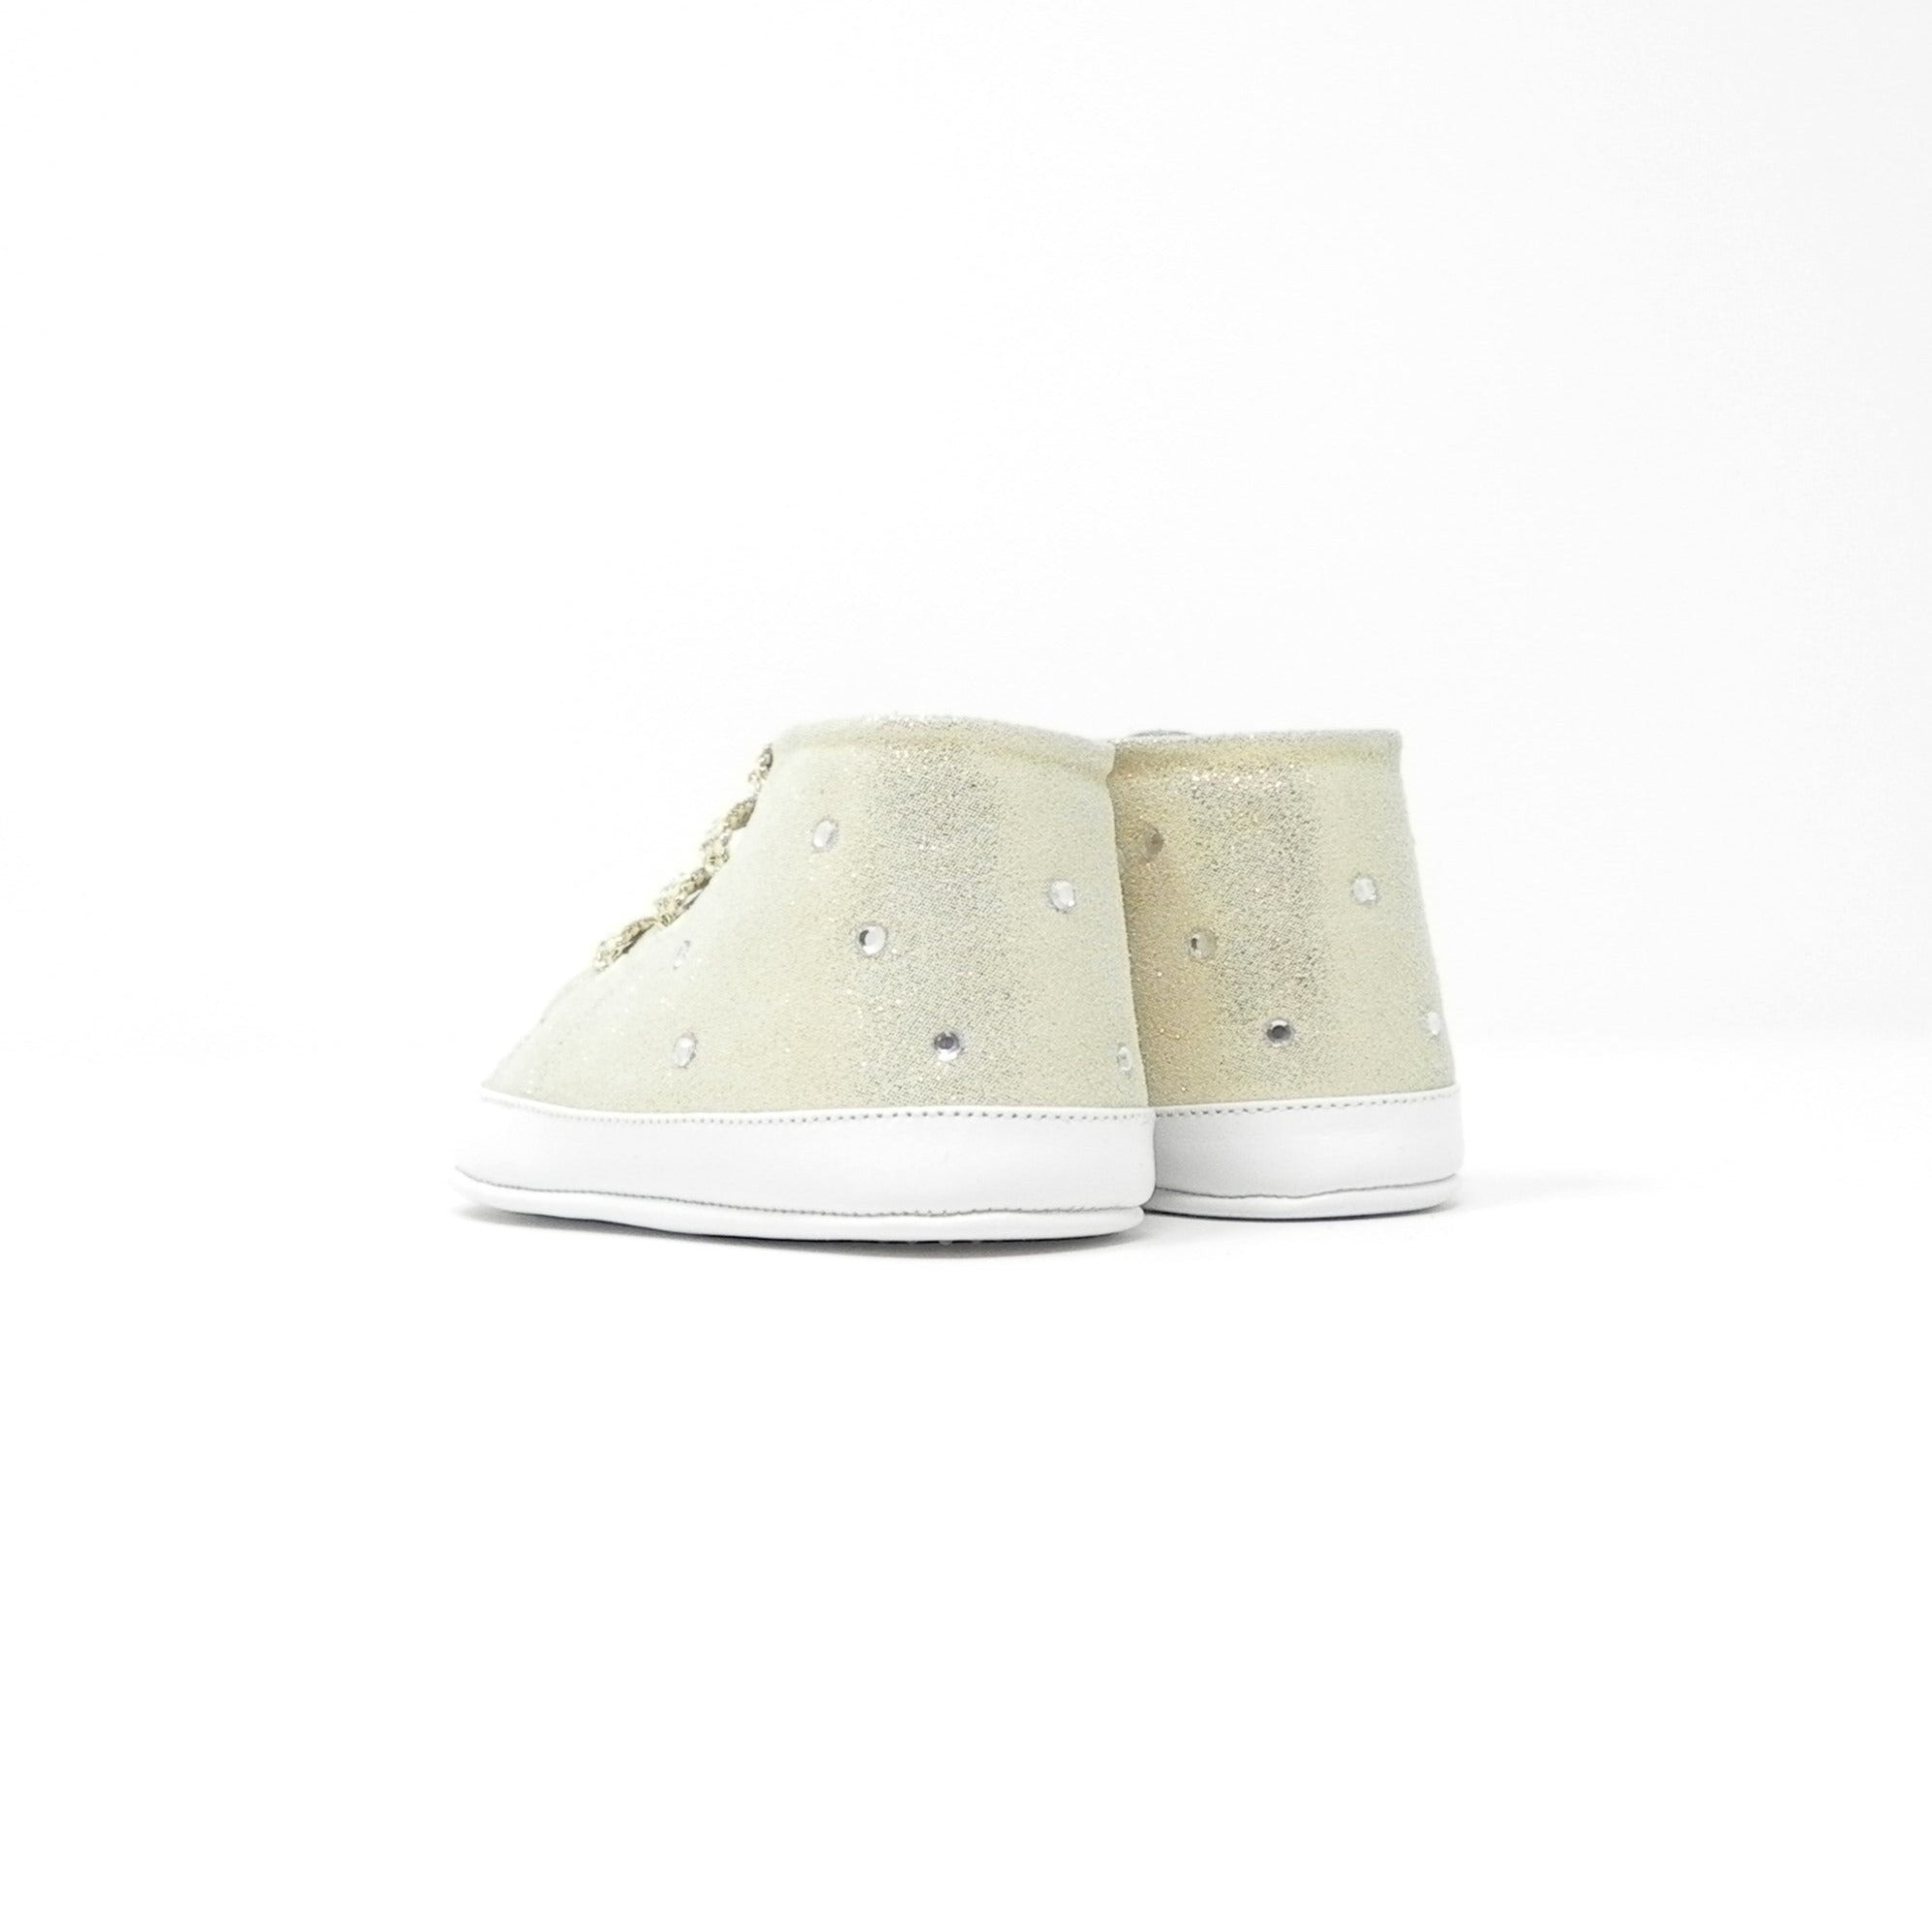 BABY CHICK - Sneakers culla